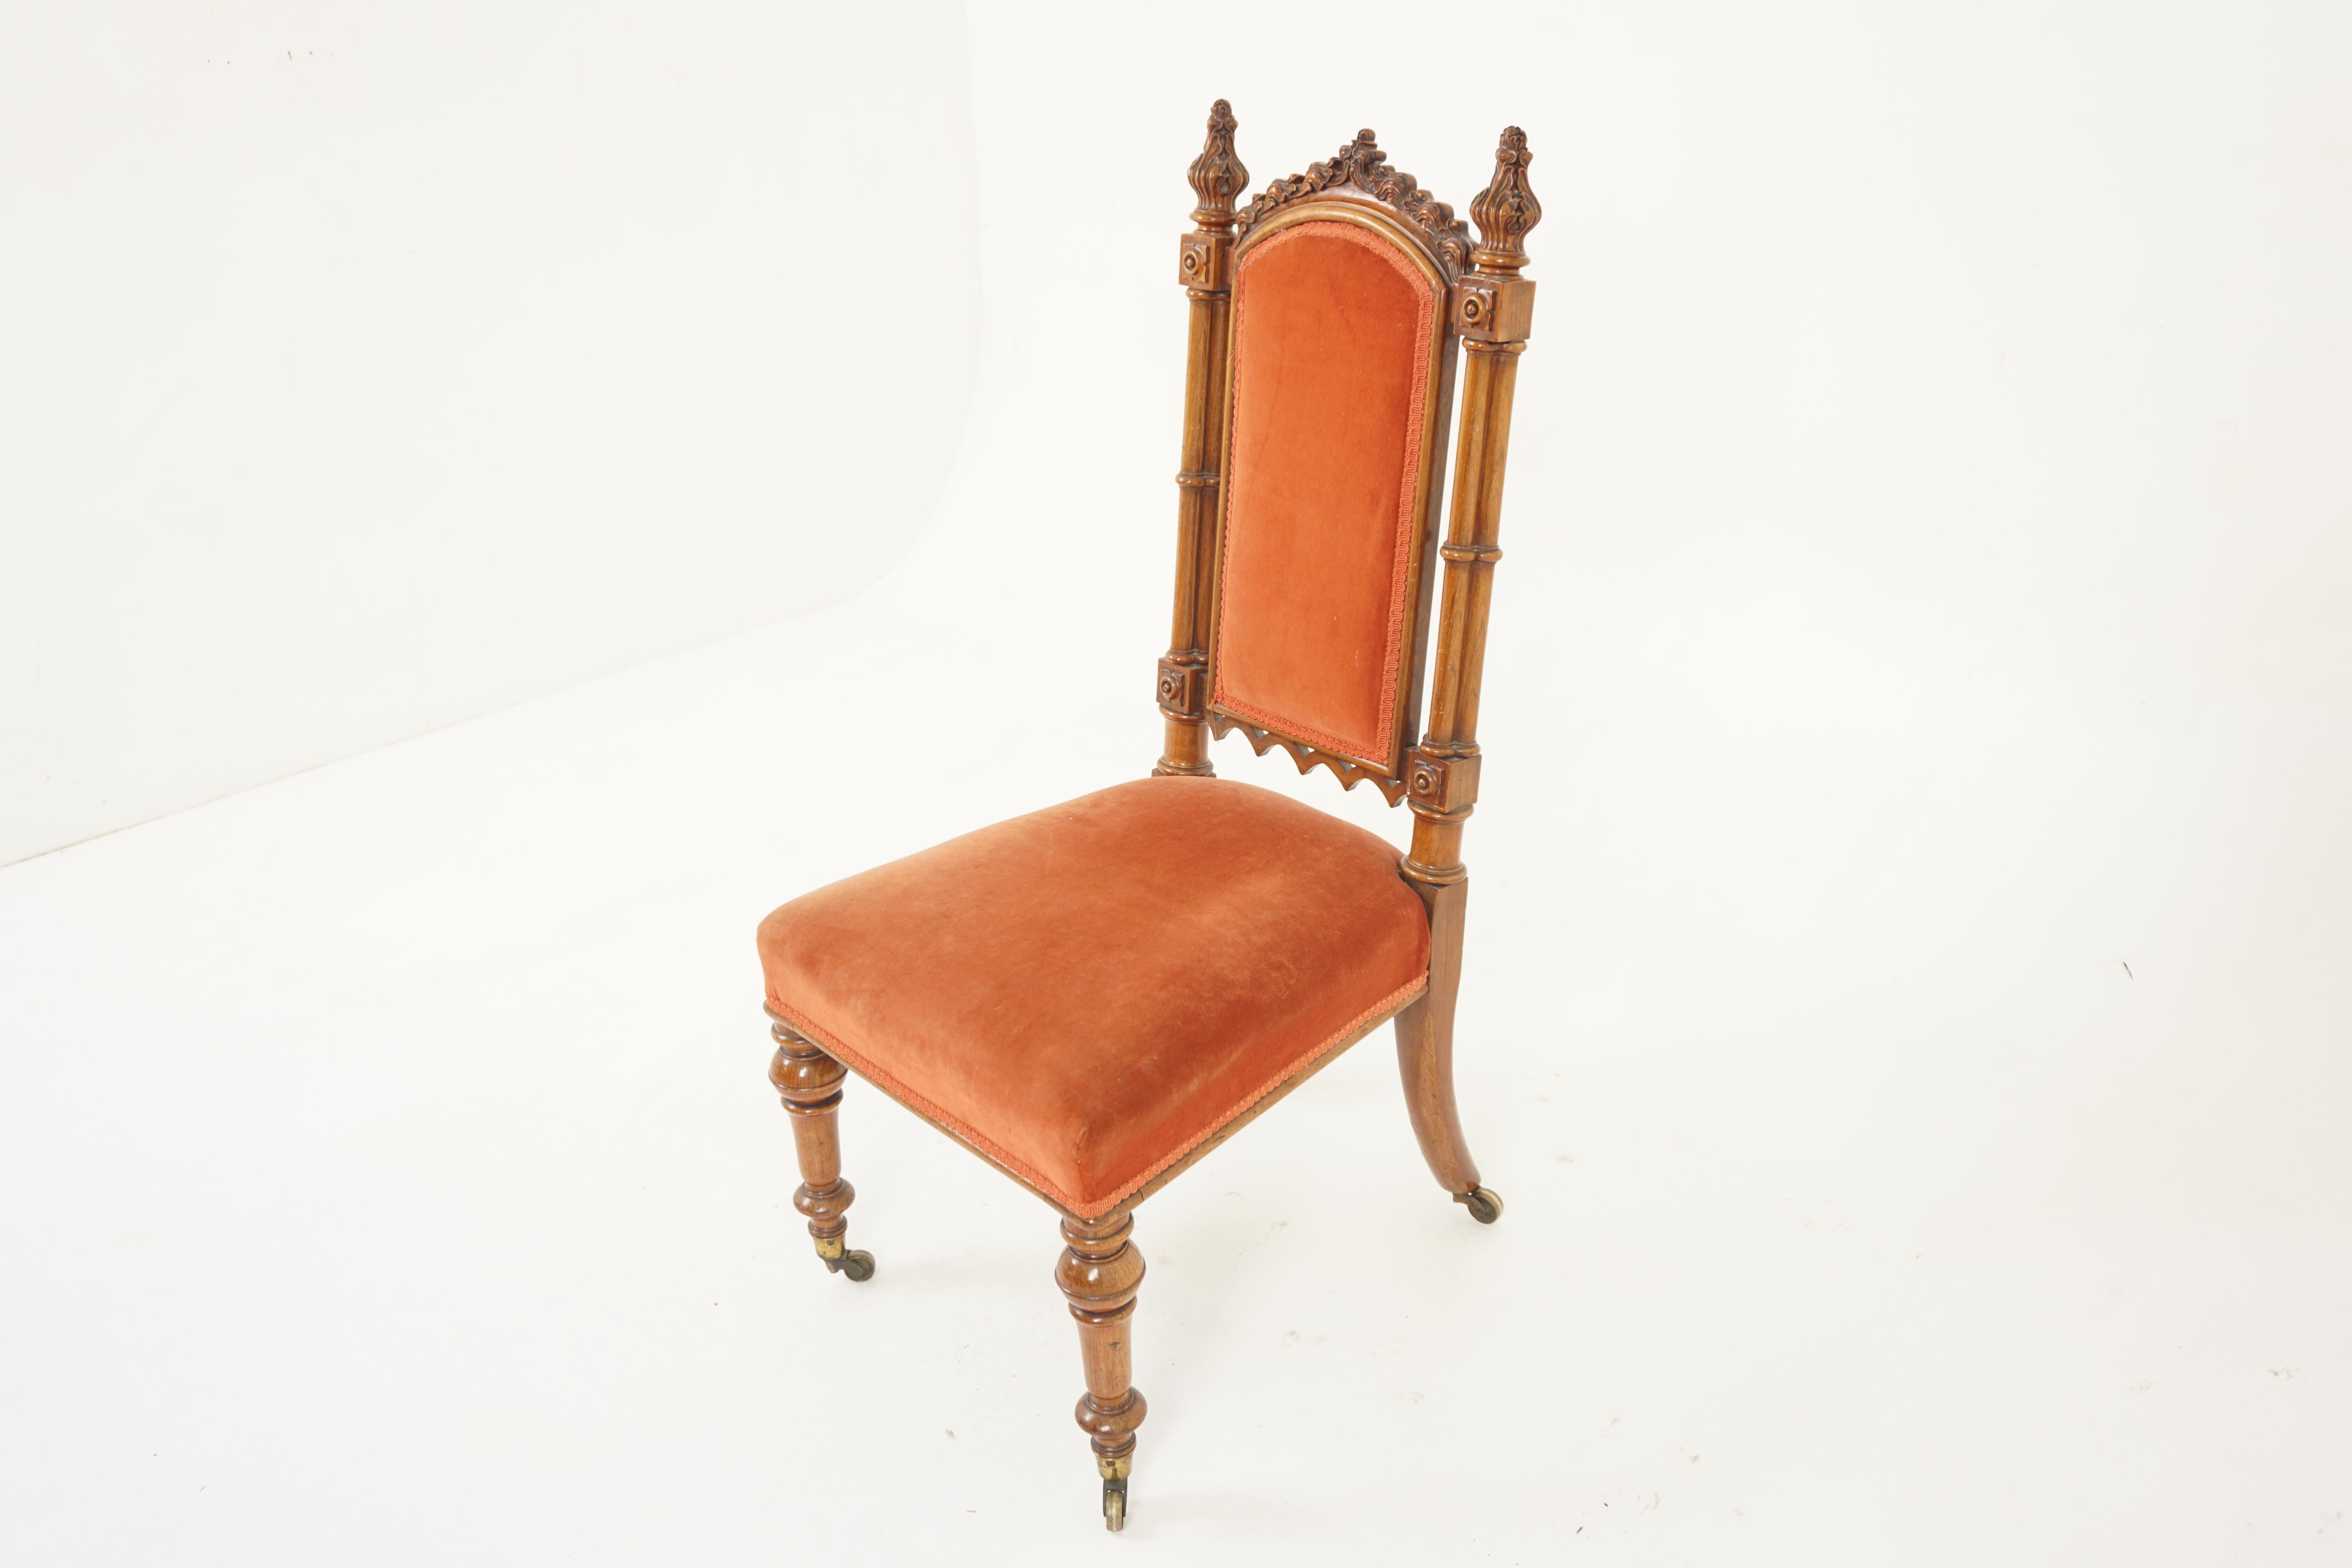 Antique Walnut Upholstered Hall, Church, Side Chair, Scotland 1880, H1195

Scotland 1880
Solid Walnut
Original Finish
Attractive top rail with carved arches
Pair of turned supports with carved finials on top
Upholstered back and seat with carved